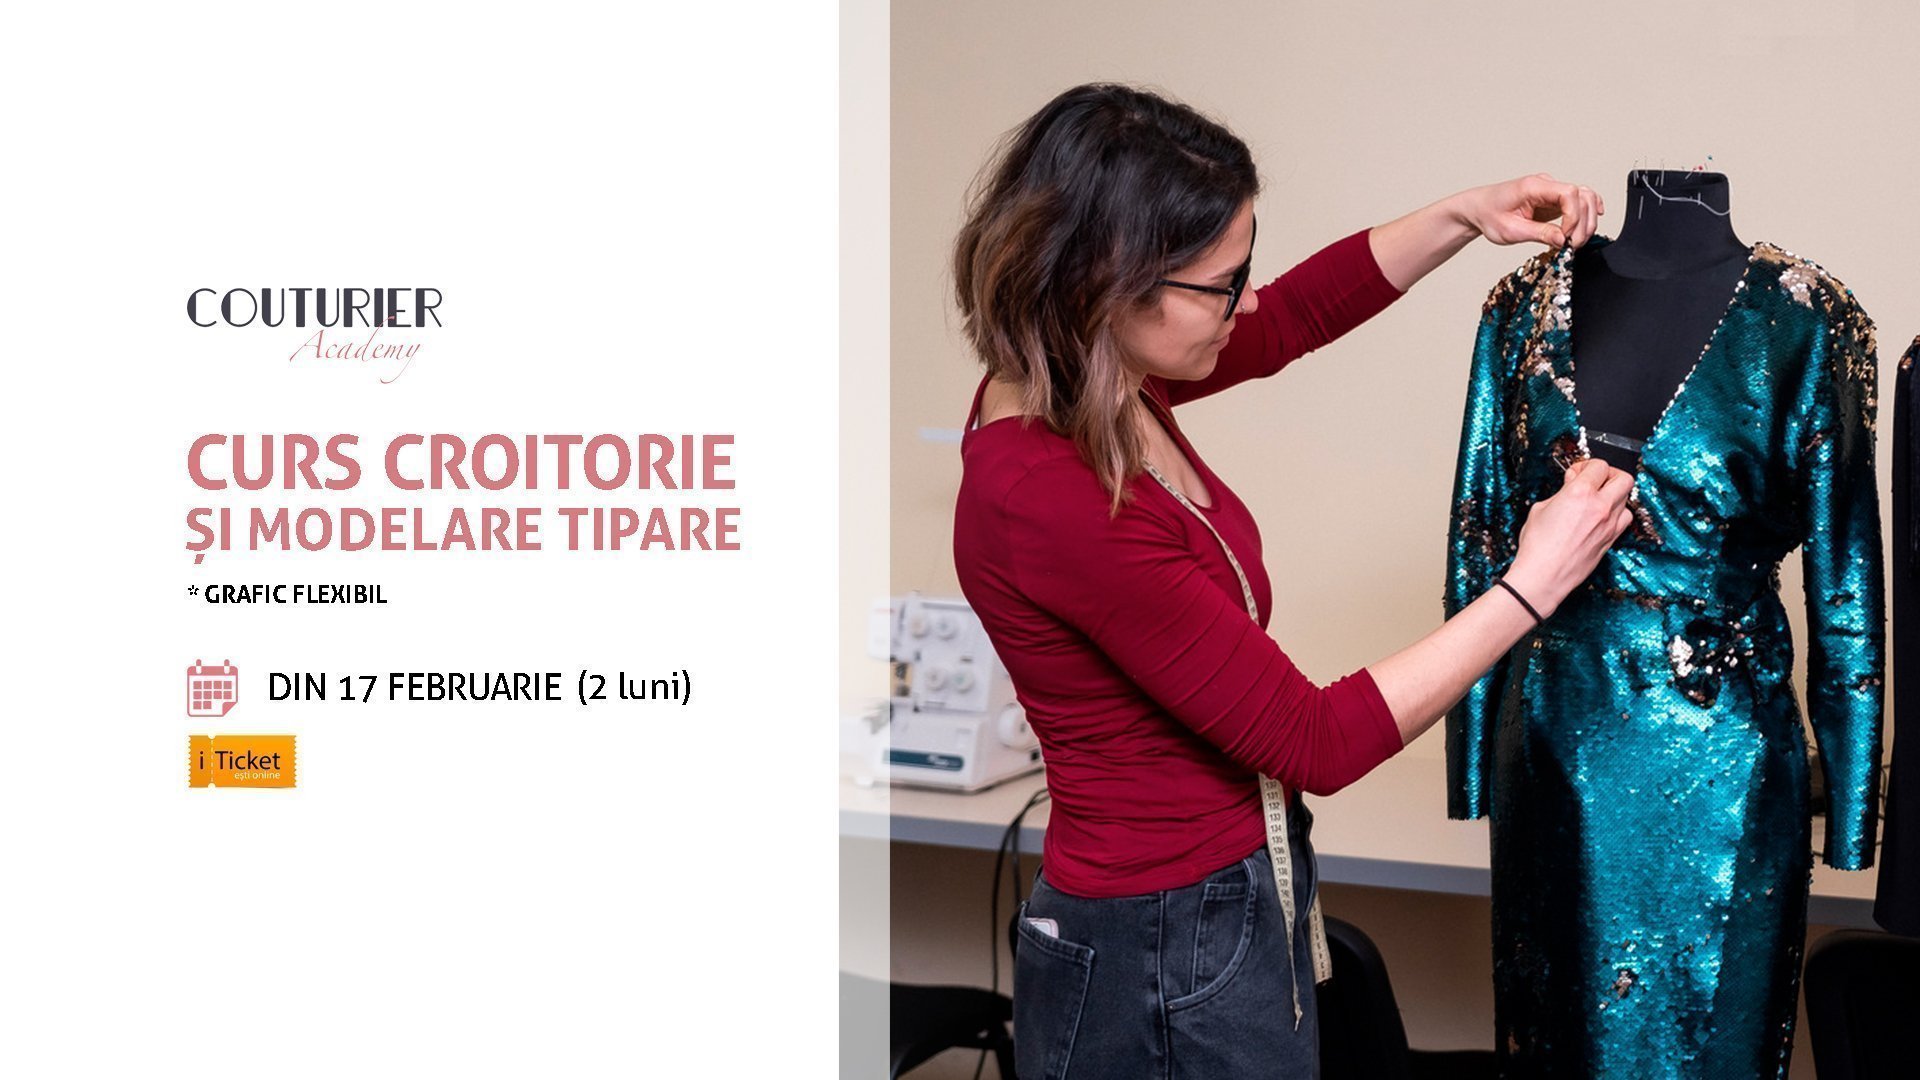 Curs Croitorie si Modelare Tipare